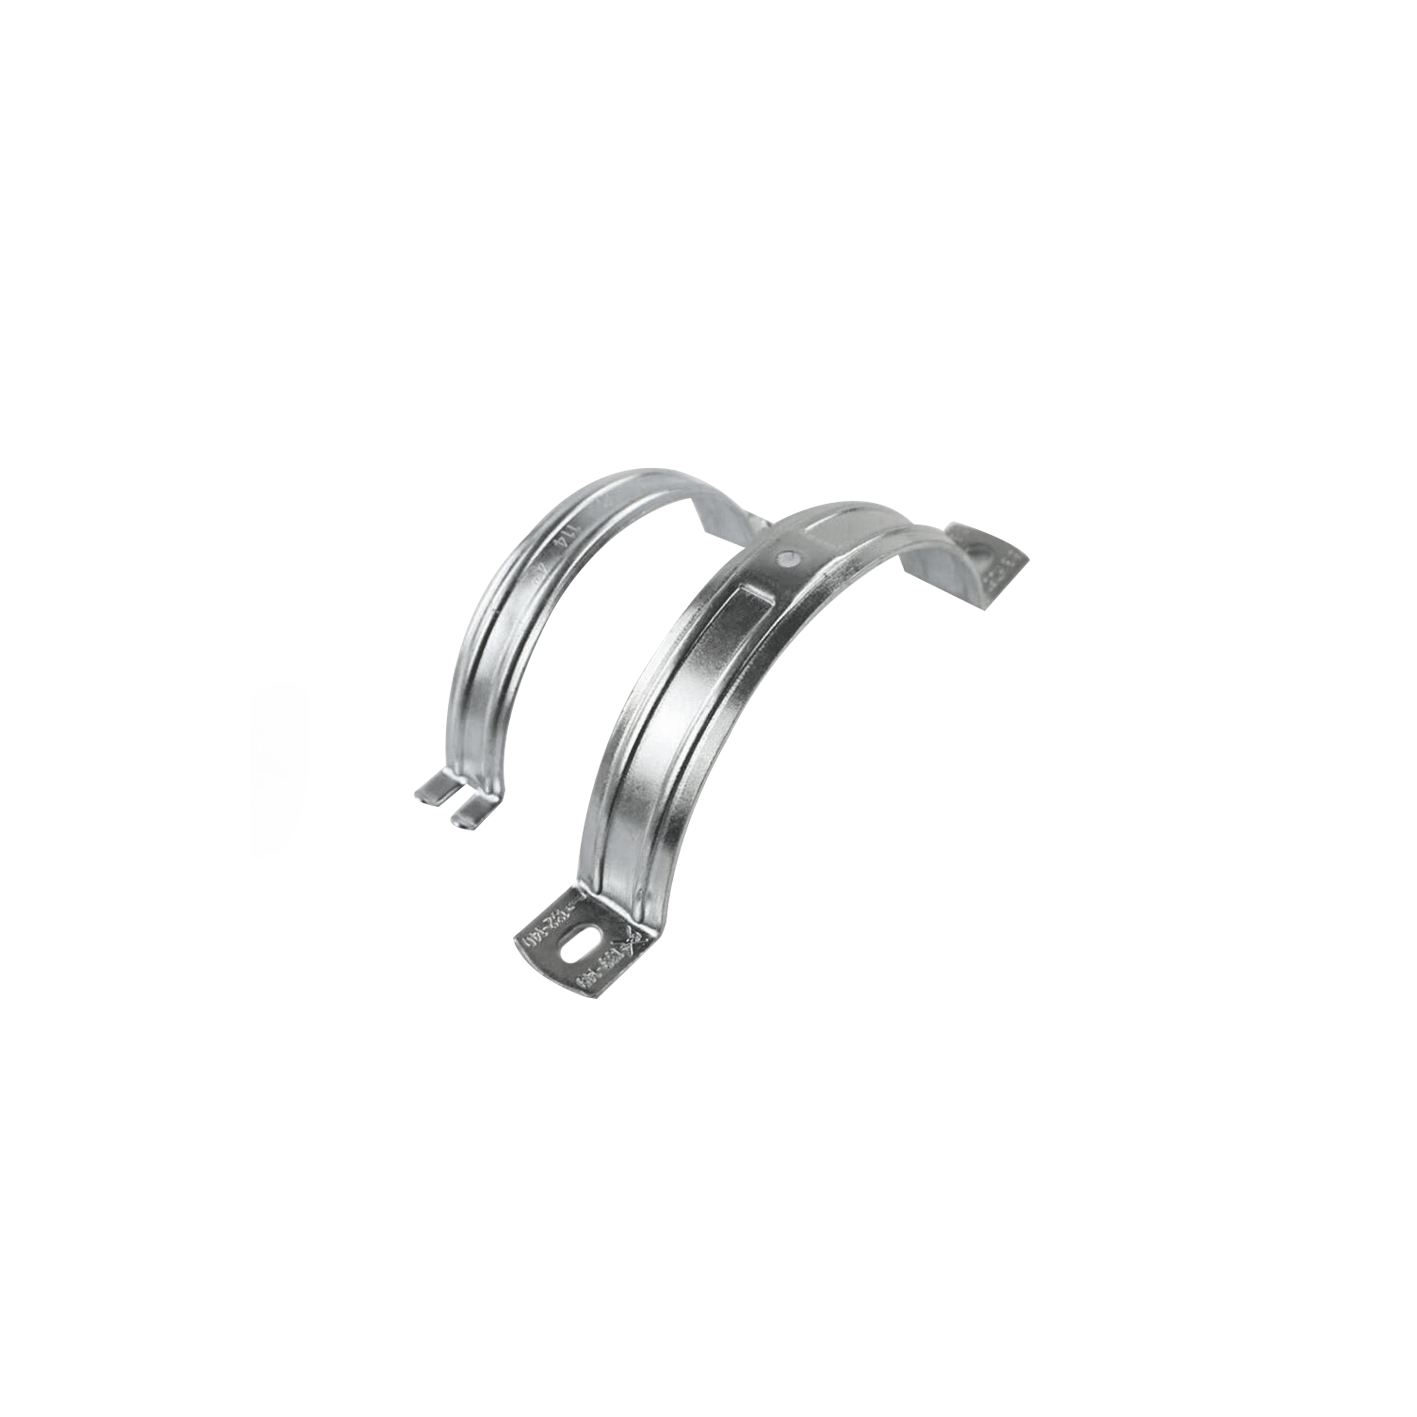 High-precision customized 304 stainless steel bent handle parts